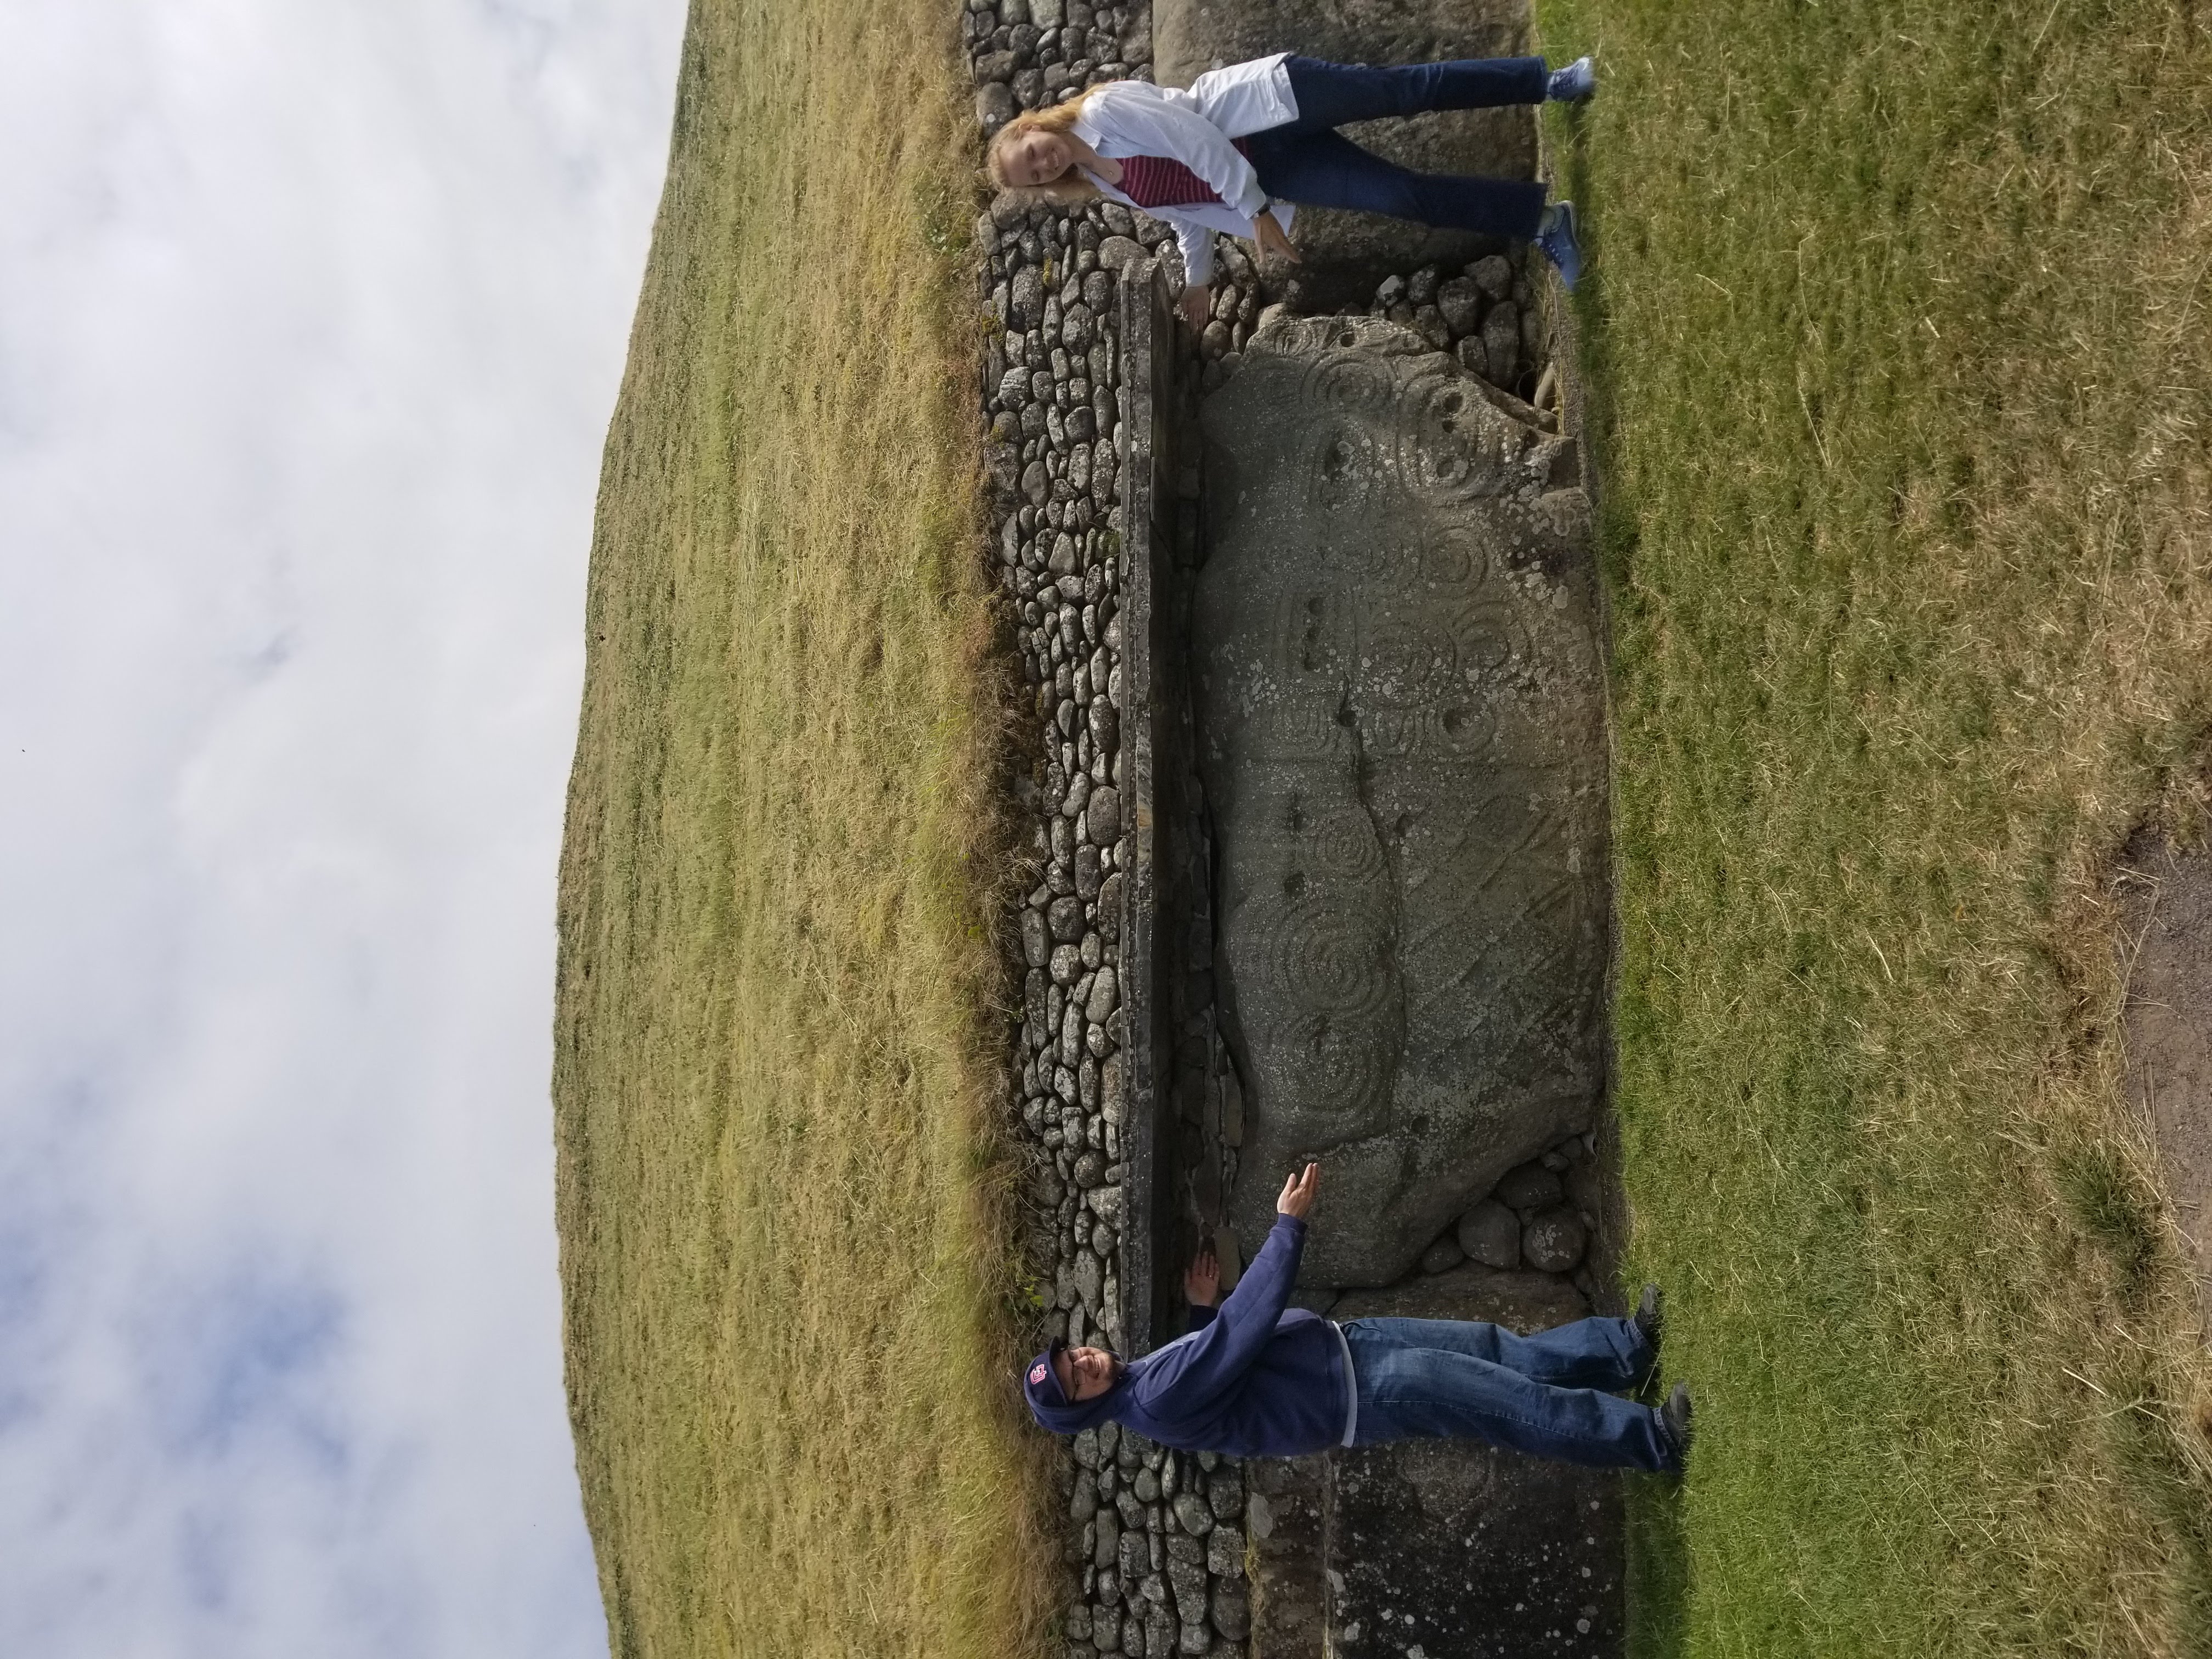 A kerbstone on the side of Newgrange, with smaller rocks positioned around it and the large grassy mound above. Author Jessica Dall and her partner stand on either side, showcasing it.